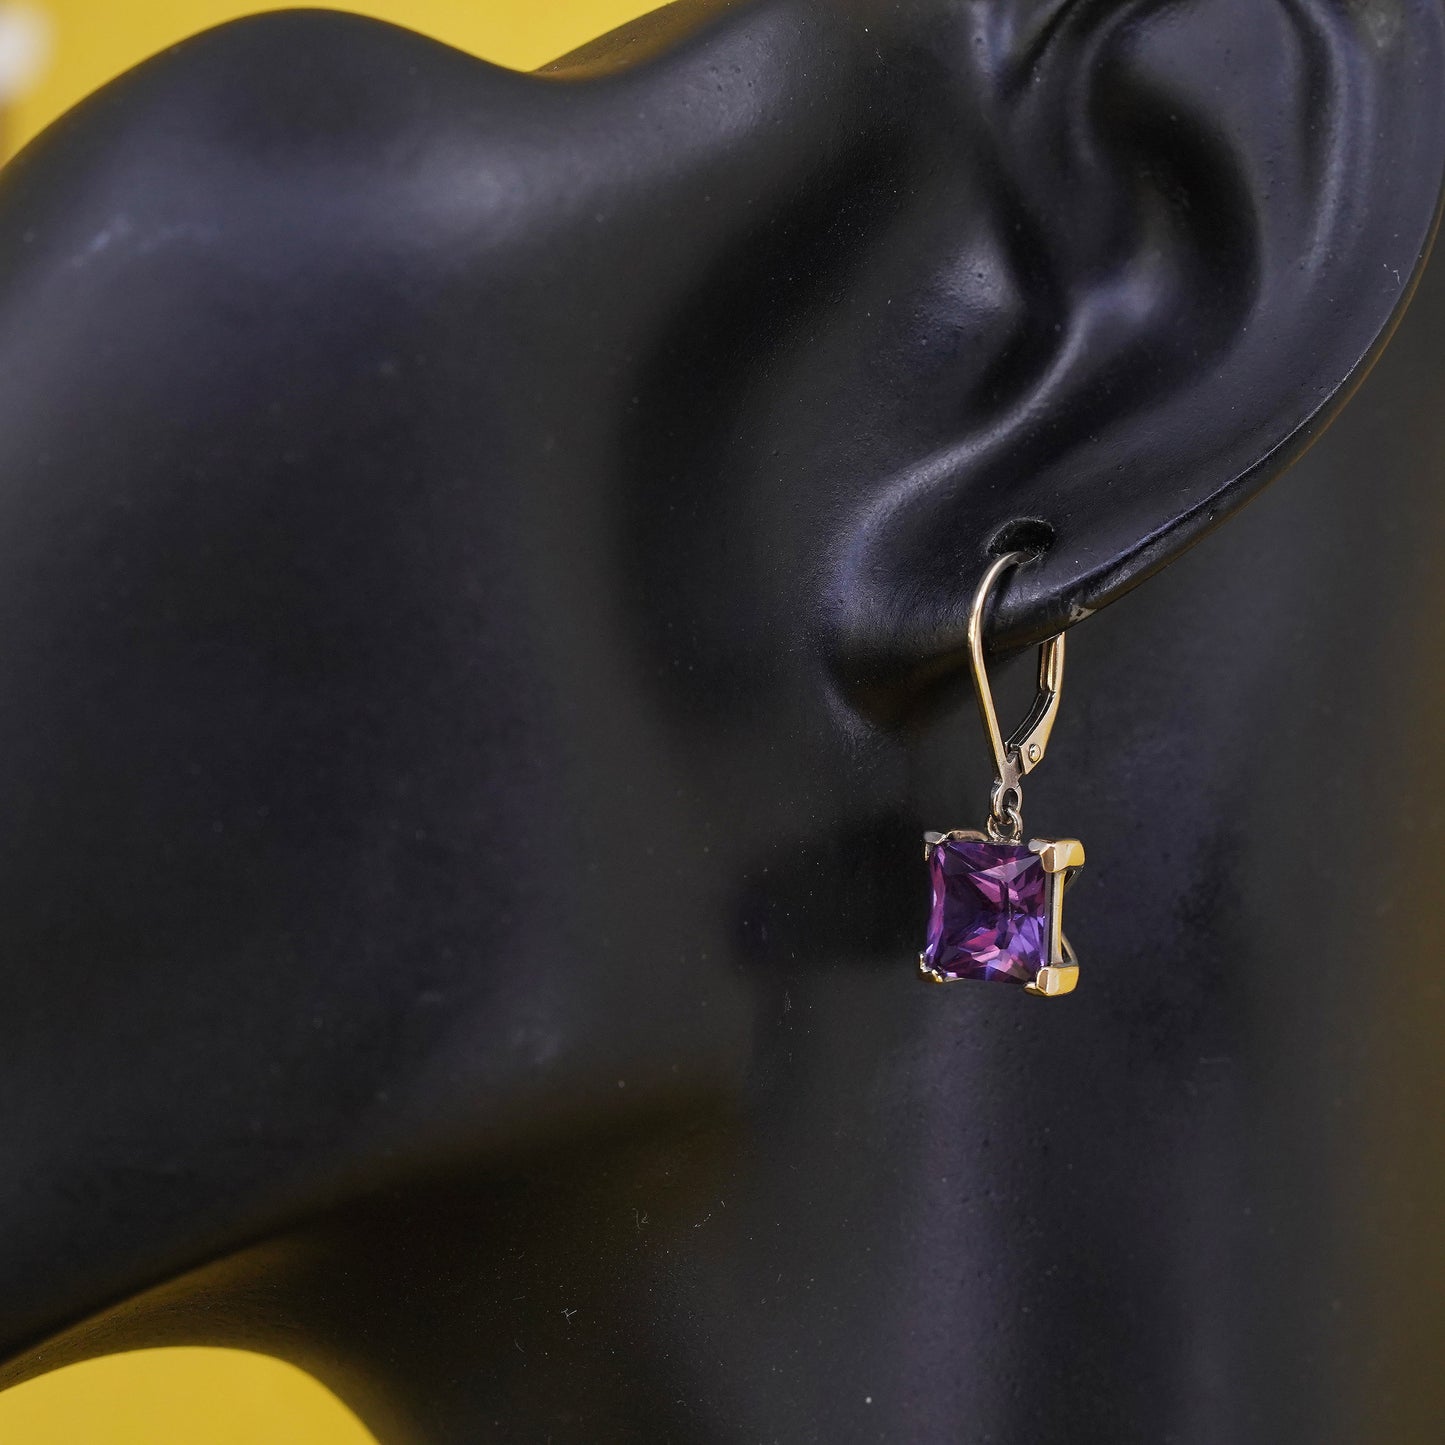 Vintage vermeil gold over Sterling 925 silver handmade earrings with square amethyst